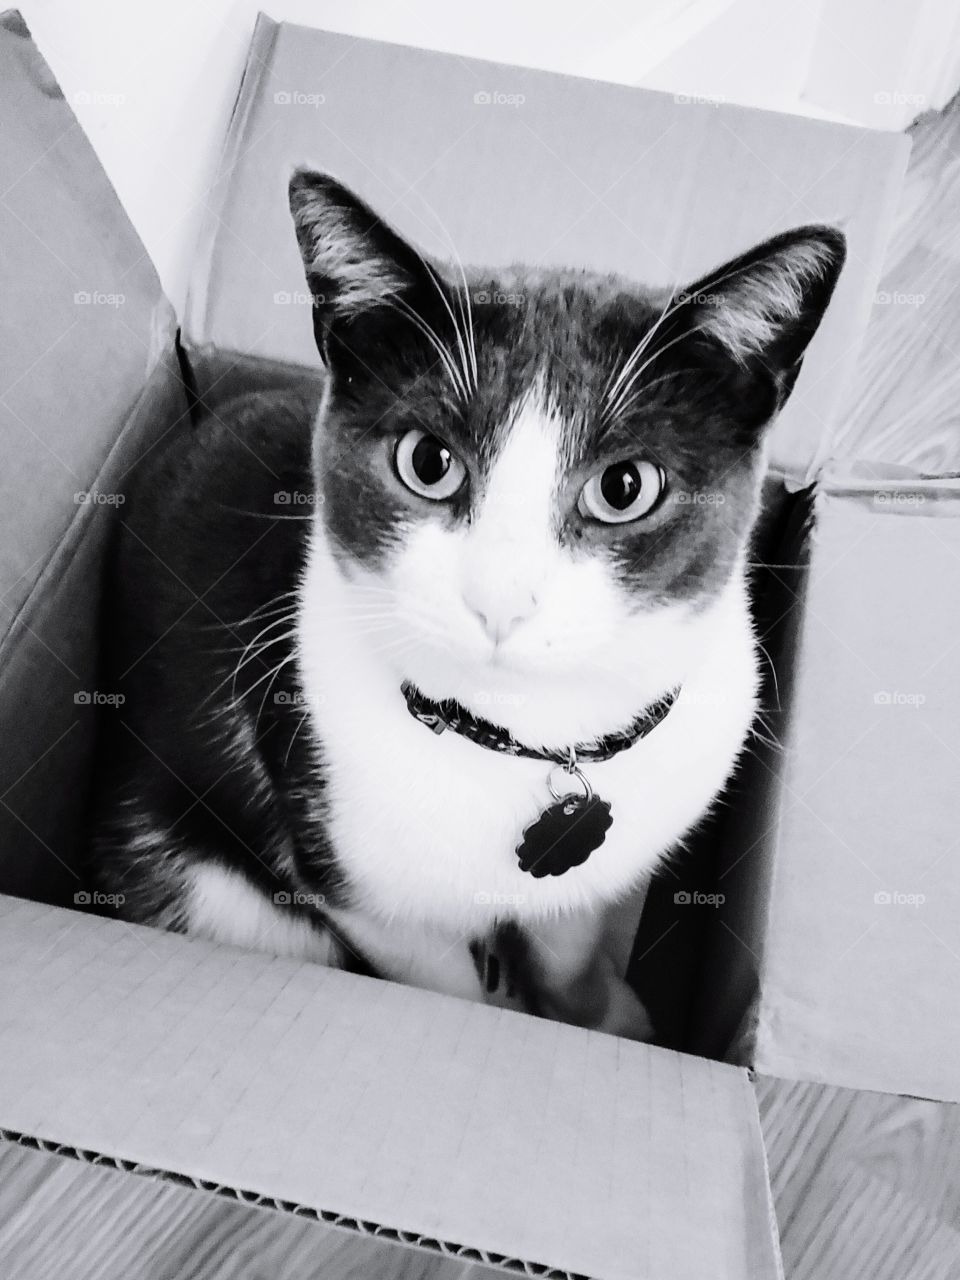 Black and white cat playing in box